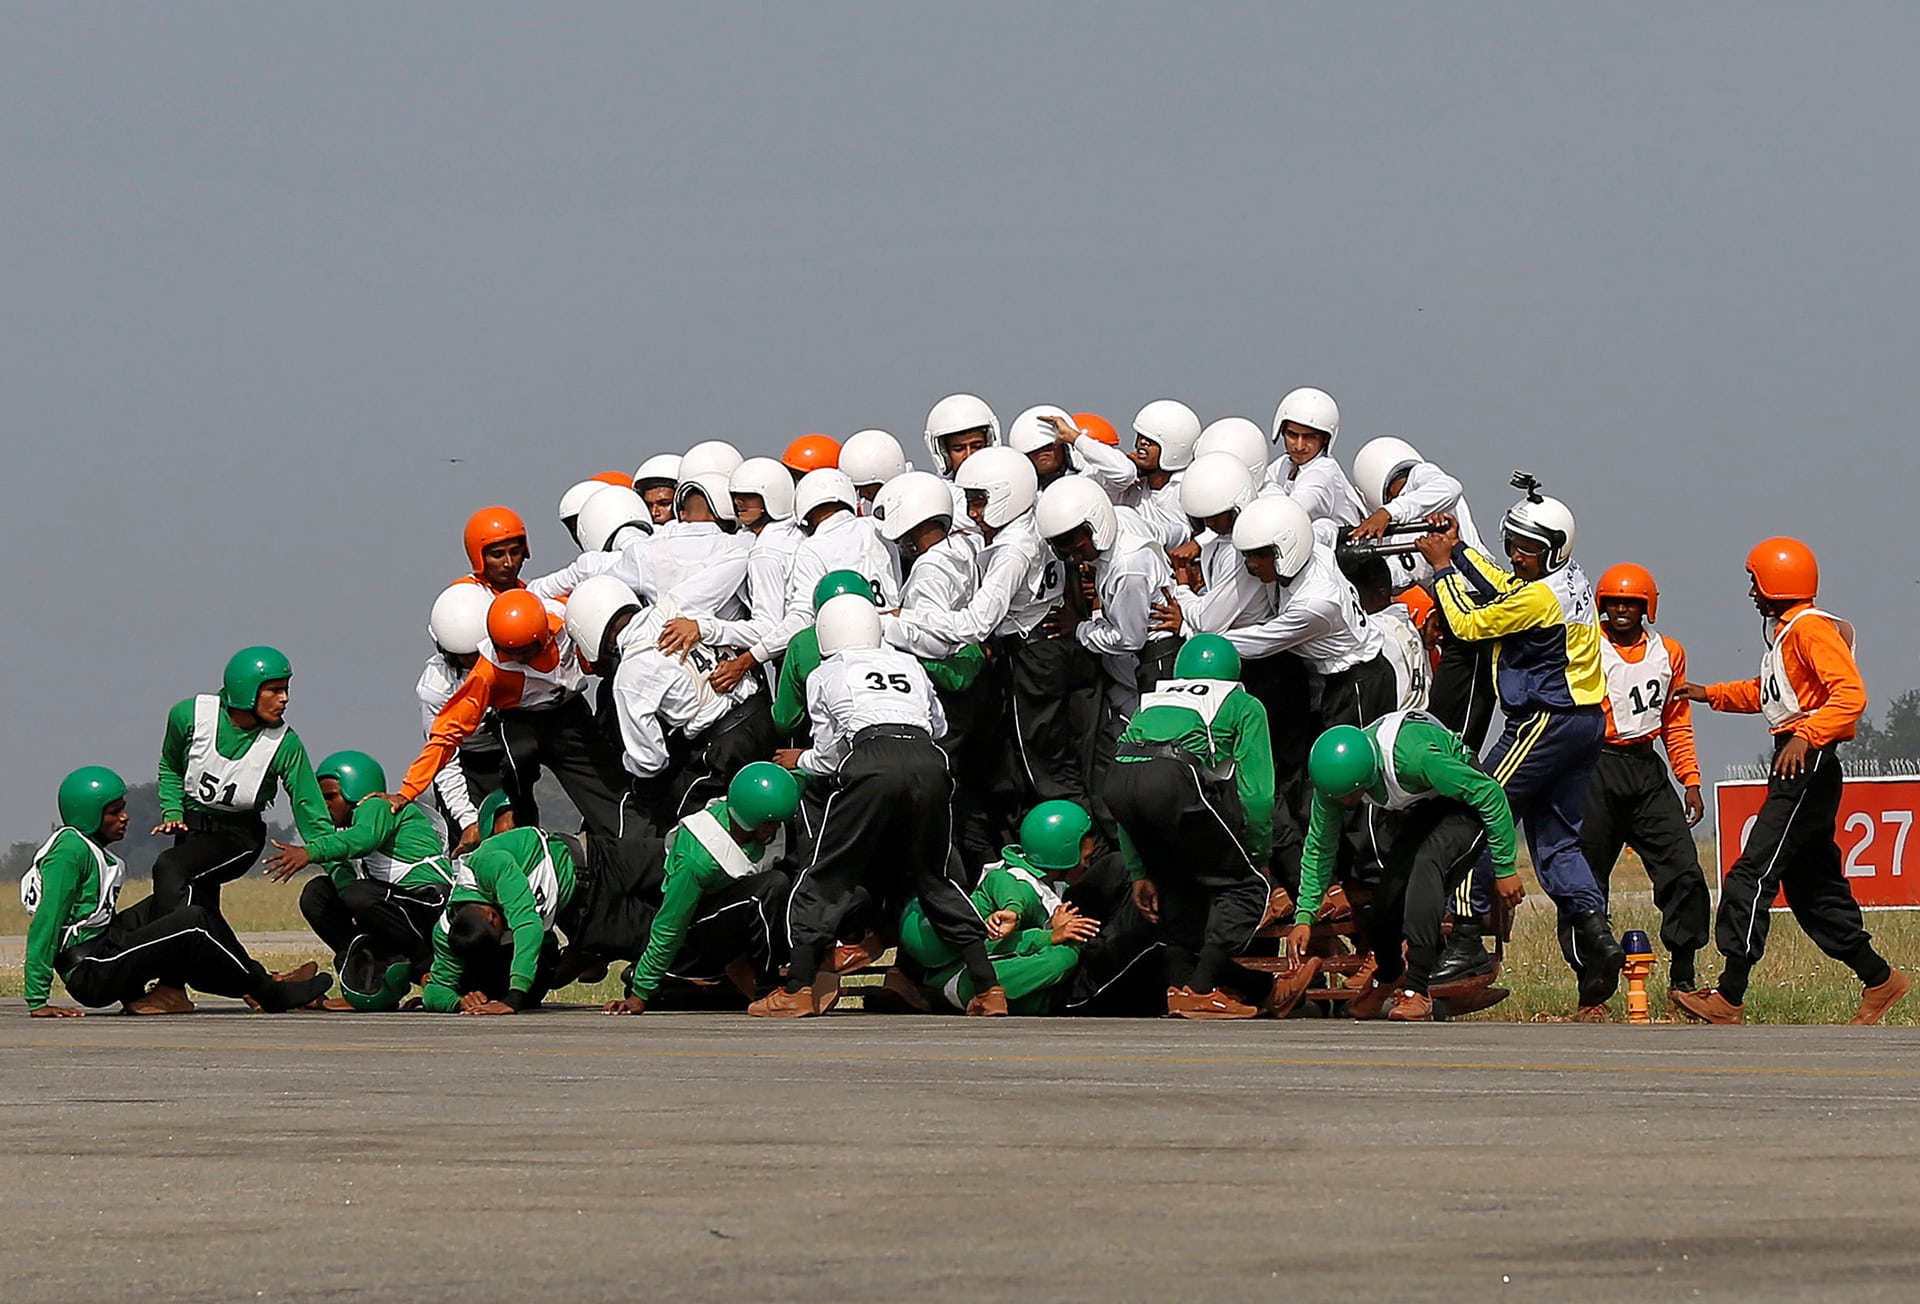 Members of the Indian armyâs motorcycle display team, ASC Tornadoes, fall to the ground after attempting to create a world record for the most people on a single moving motorcycle at the Yelahanka Air Force station, Bengaluru, India